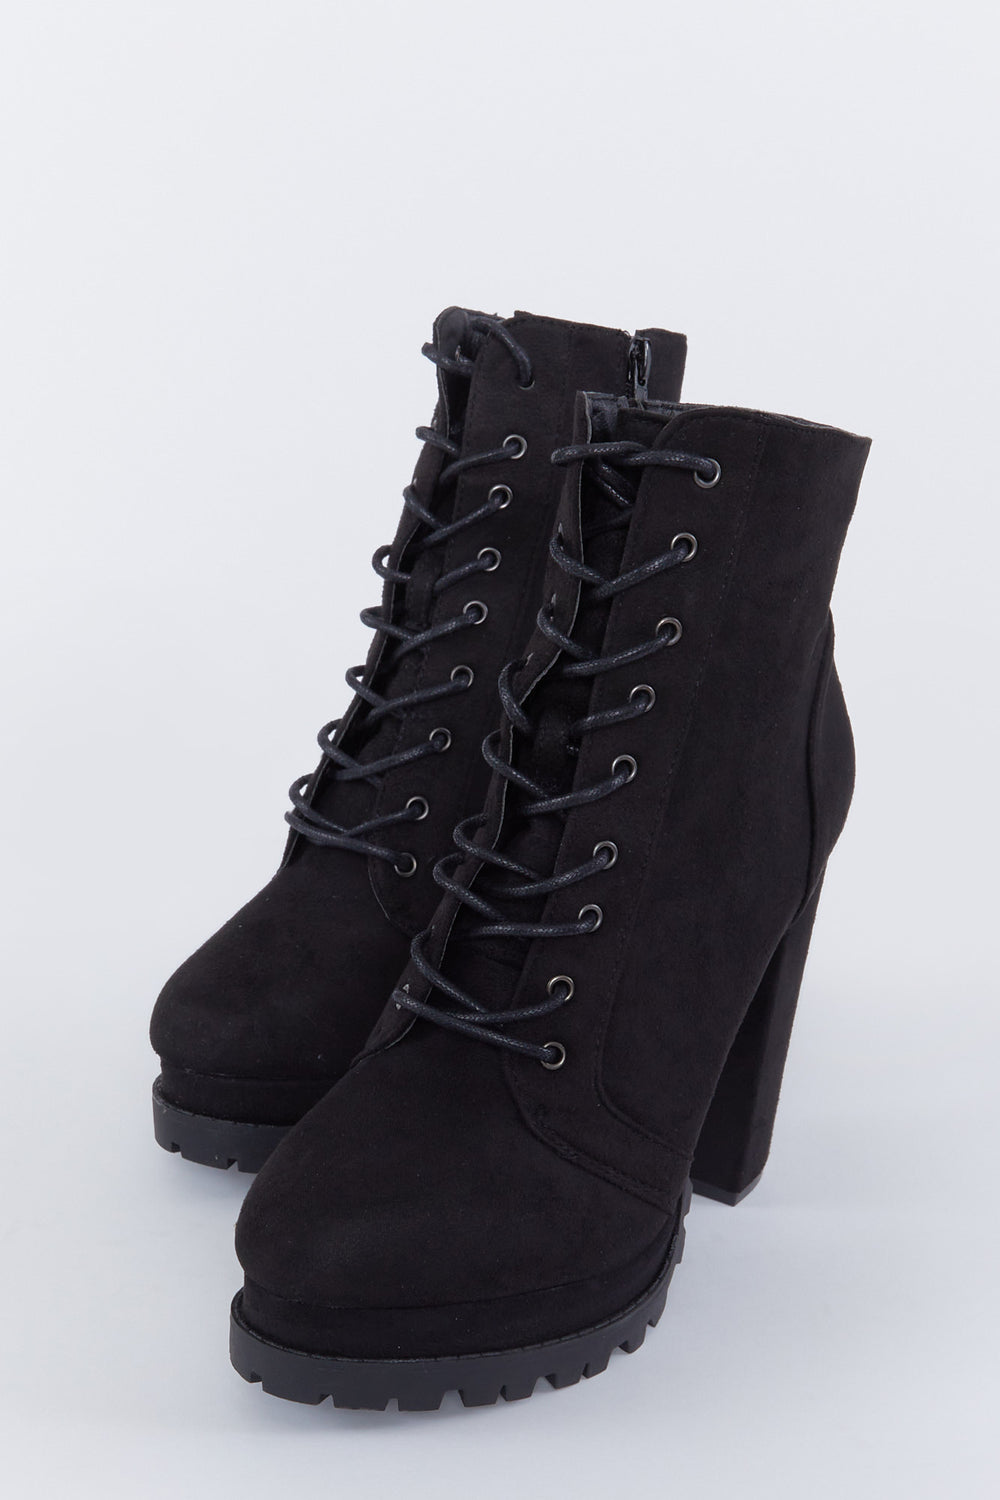 Faux-Suede Lace-Up Lug Sole Block Heel Boot Black